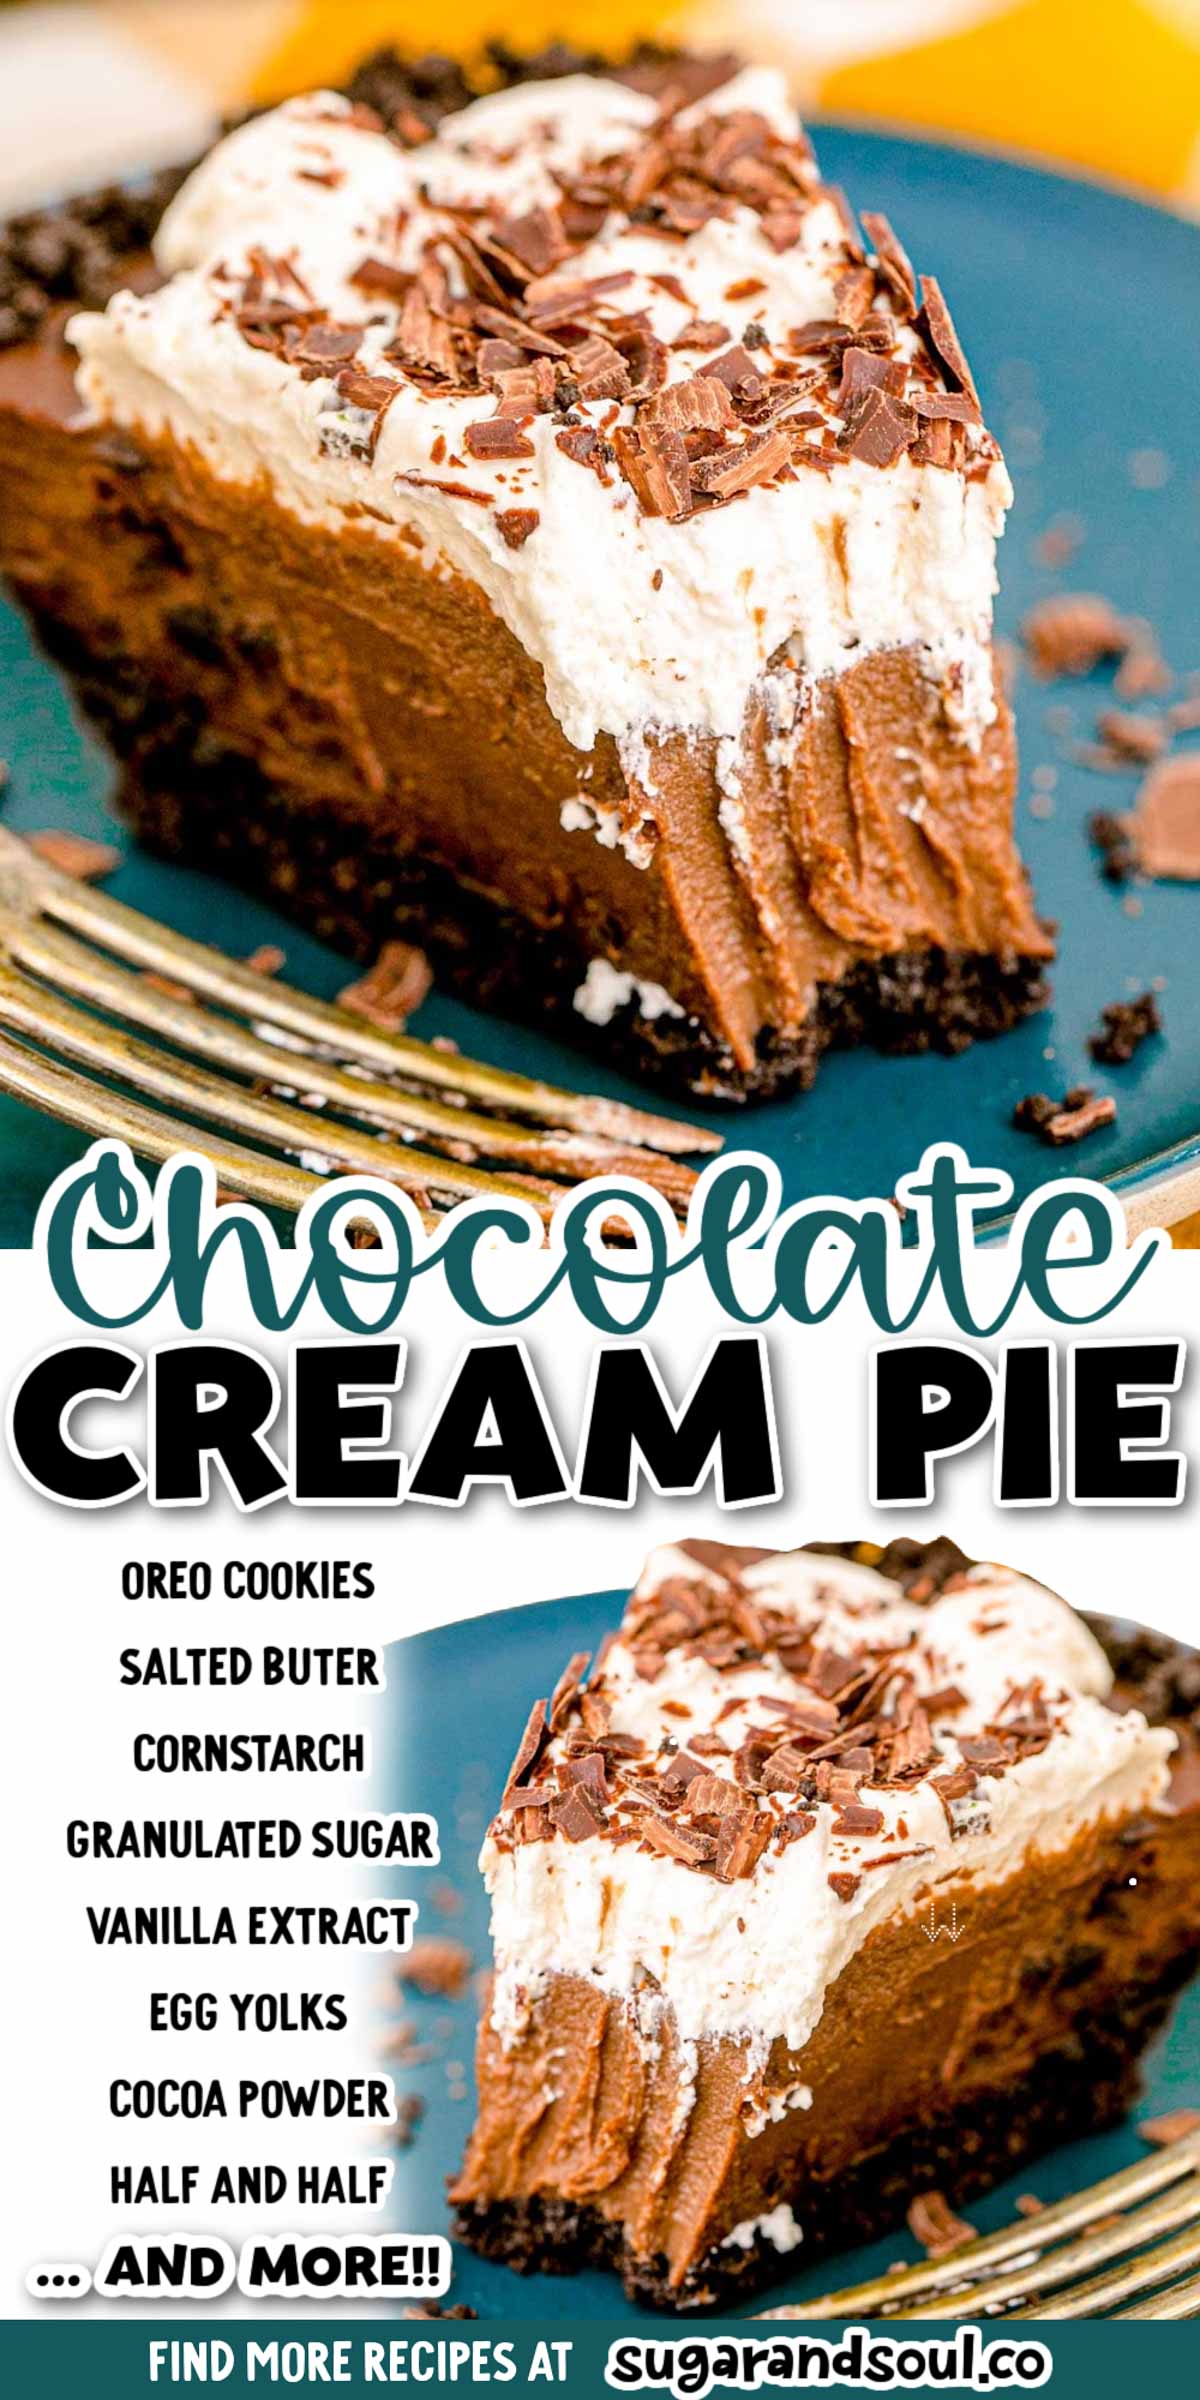 This Chocolate Cream Pie has an Oreo cookie crust that's filled with a rich chocolate custard filling then topped with fluffy whipped cream! The perfect dessert for holidays, picnics, and parties! via @sugarandsoulco